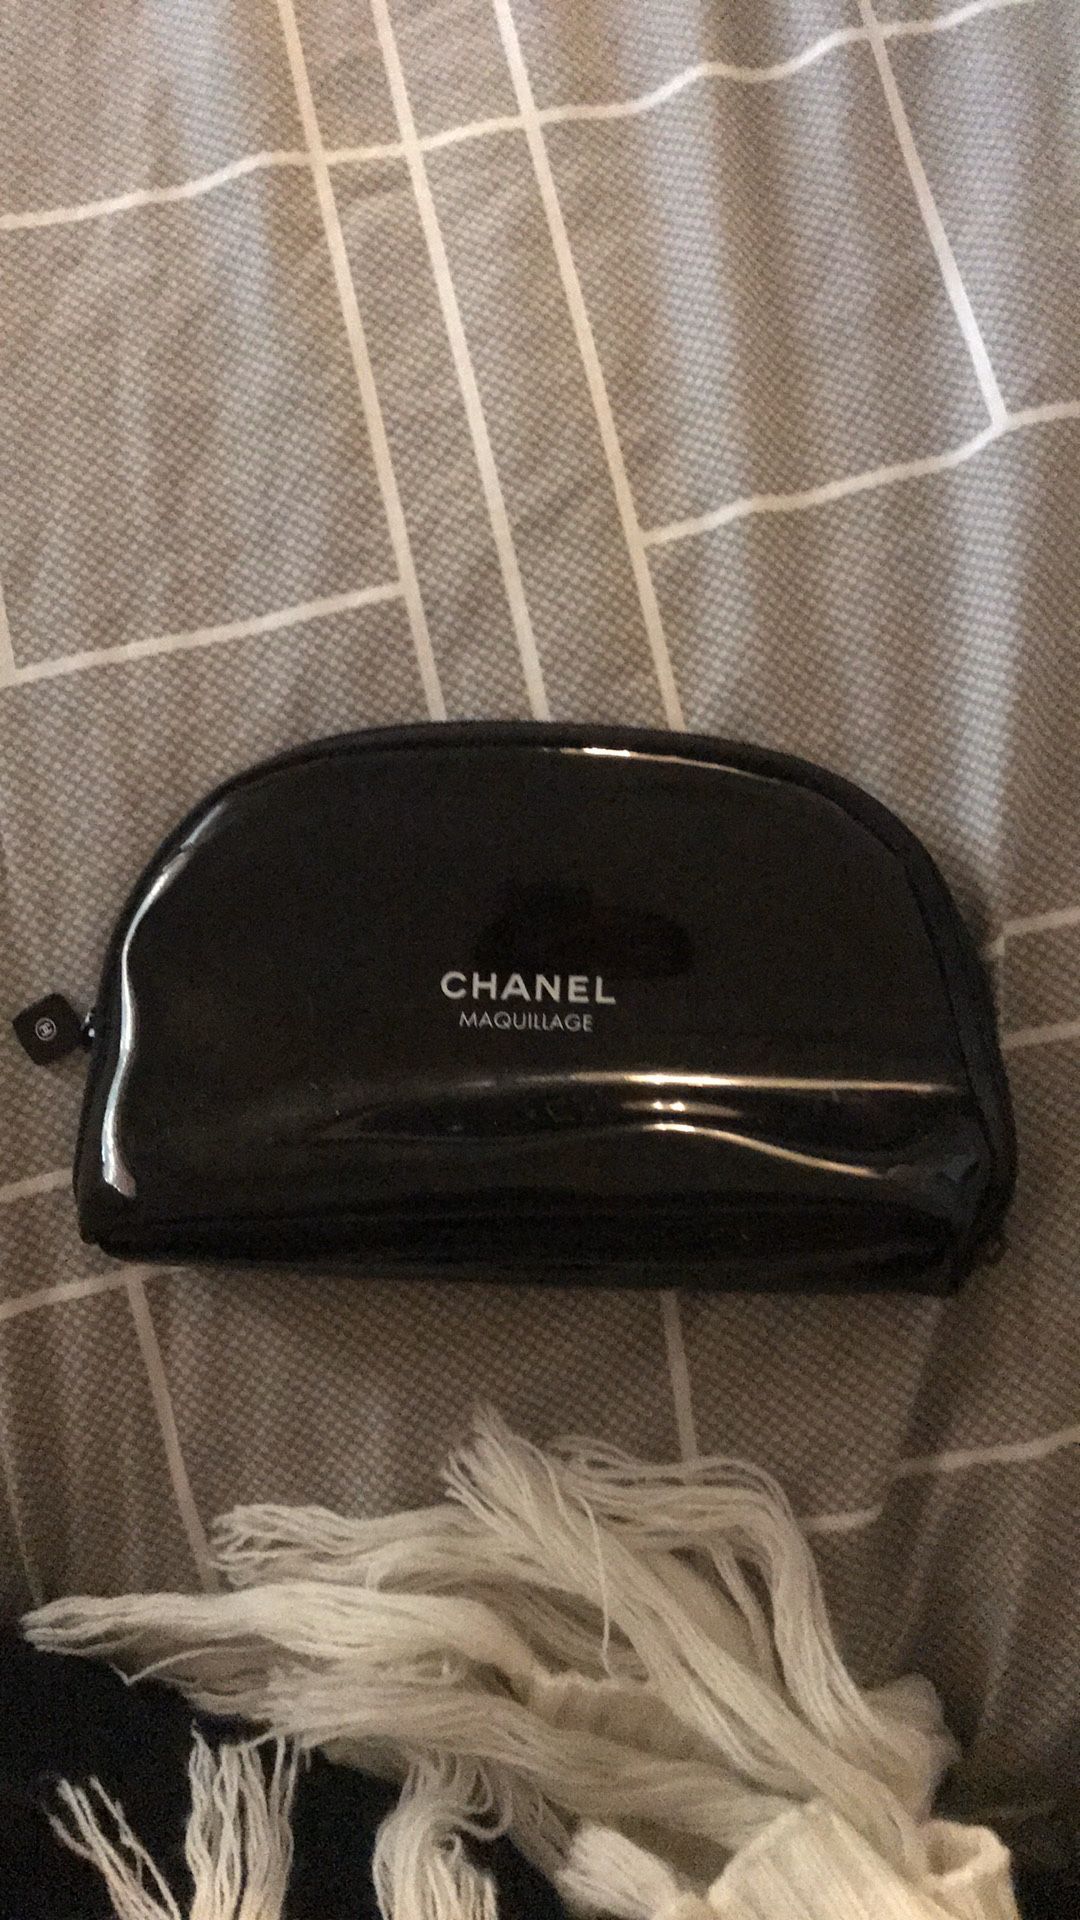 Chanel cosmetic zippered bag black & white